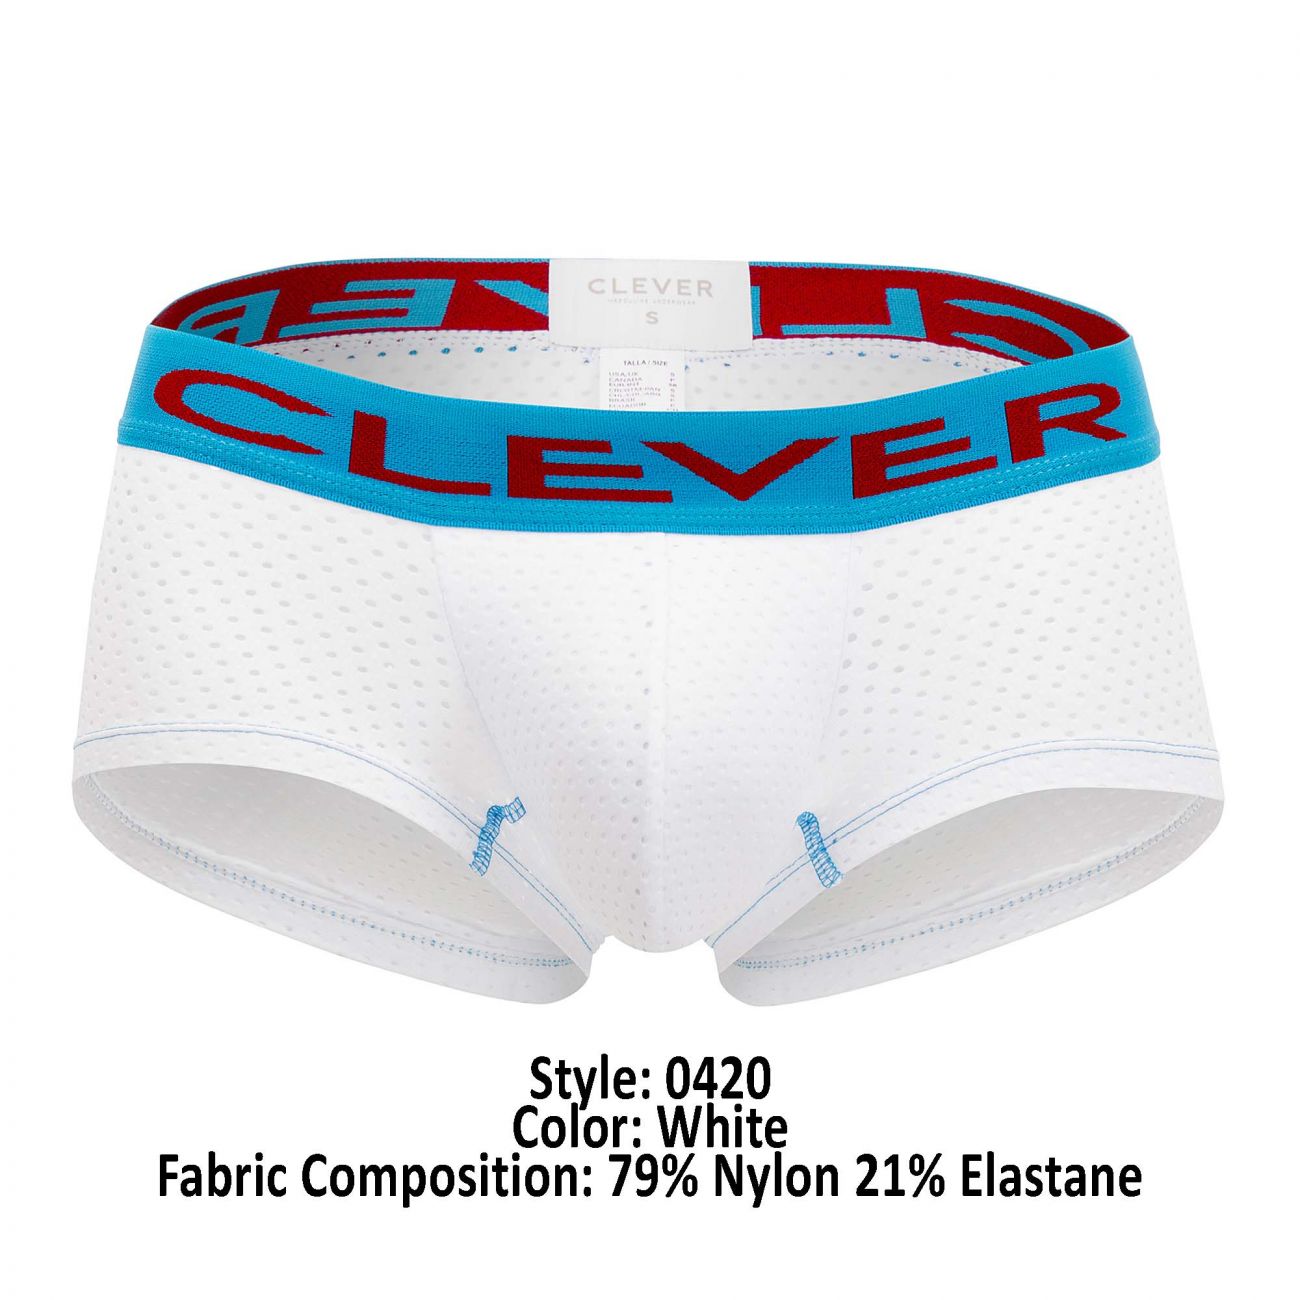 Clever 0420 Requirement Trunks White